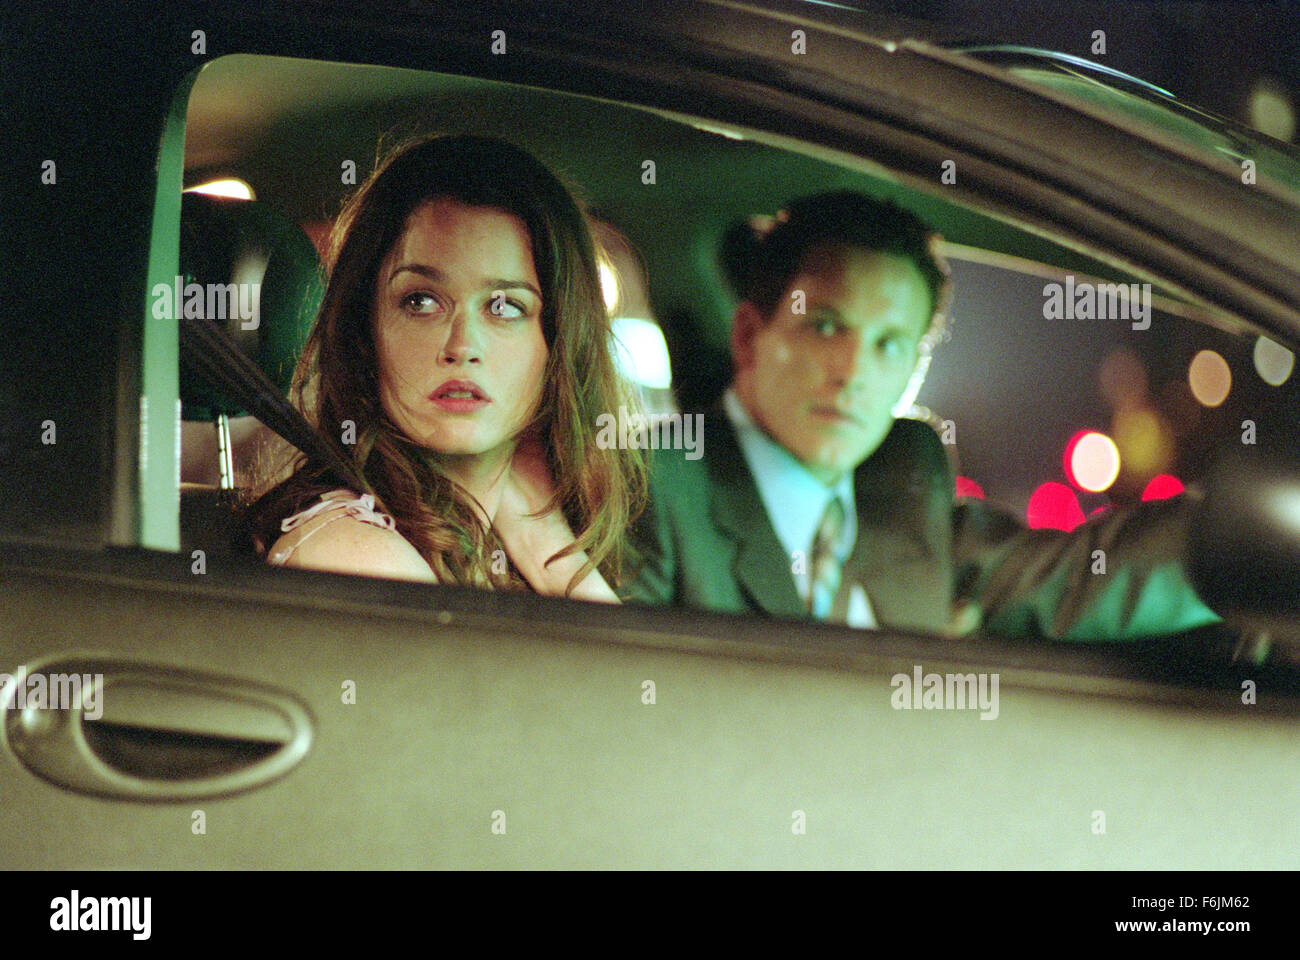 RELEASE DATE: September 3, 2004. MOVIE TITLE: Paparazzi. STUDIO: 20th Century Fox. PLOT: A rising Hollywood actor decides to take personal revenge against a group of four persistent photographers to make them pay for almost causing a personal tragedy involving his wife and son. PICTURED: ROBIN TUNNEY as Abby Laramie and COLE HAUSER as movie star Bo Laramie. Stock Photo